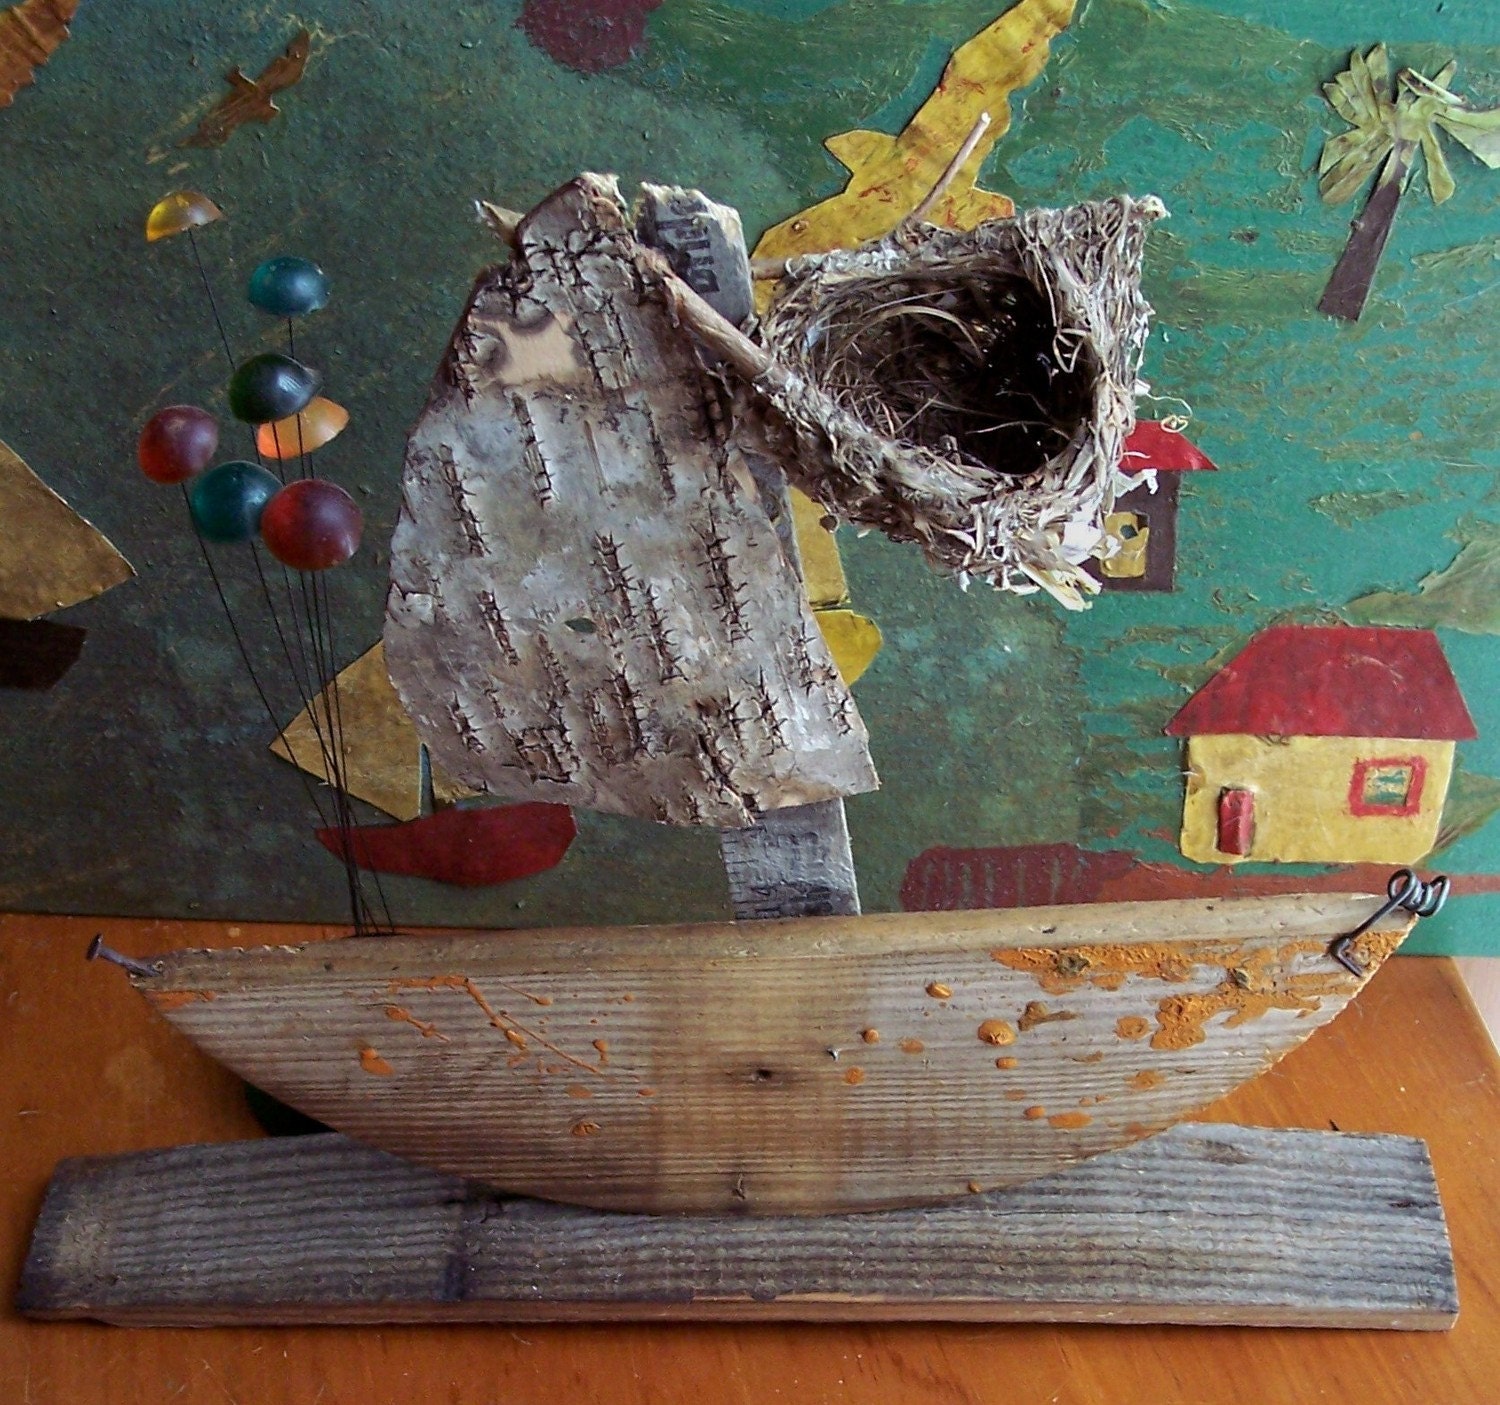 Sailboat Junk art Ship assemblage "Up in the Crows Nest"